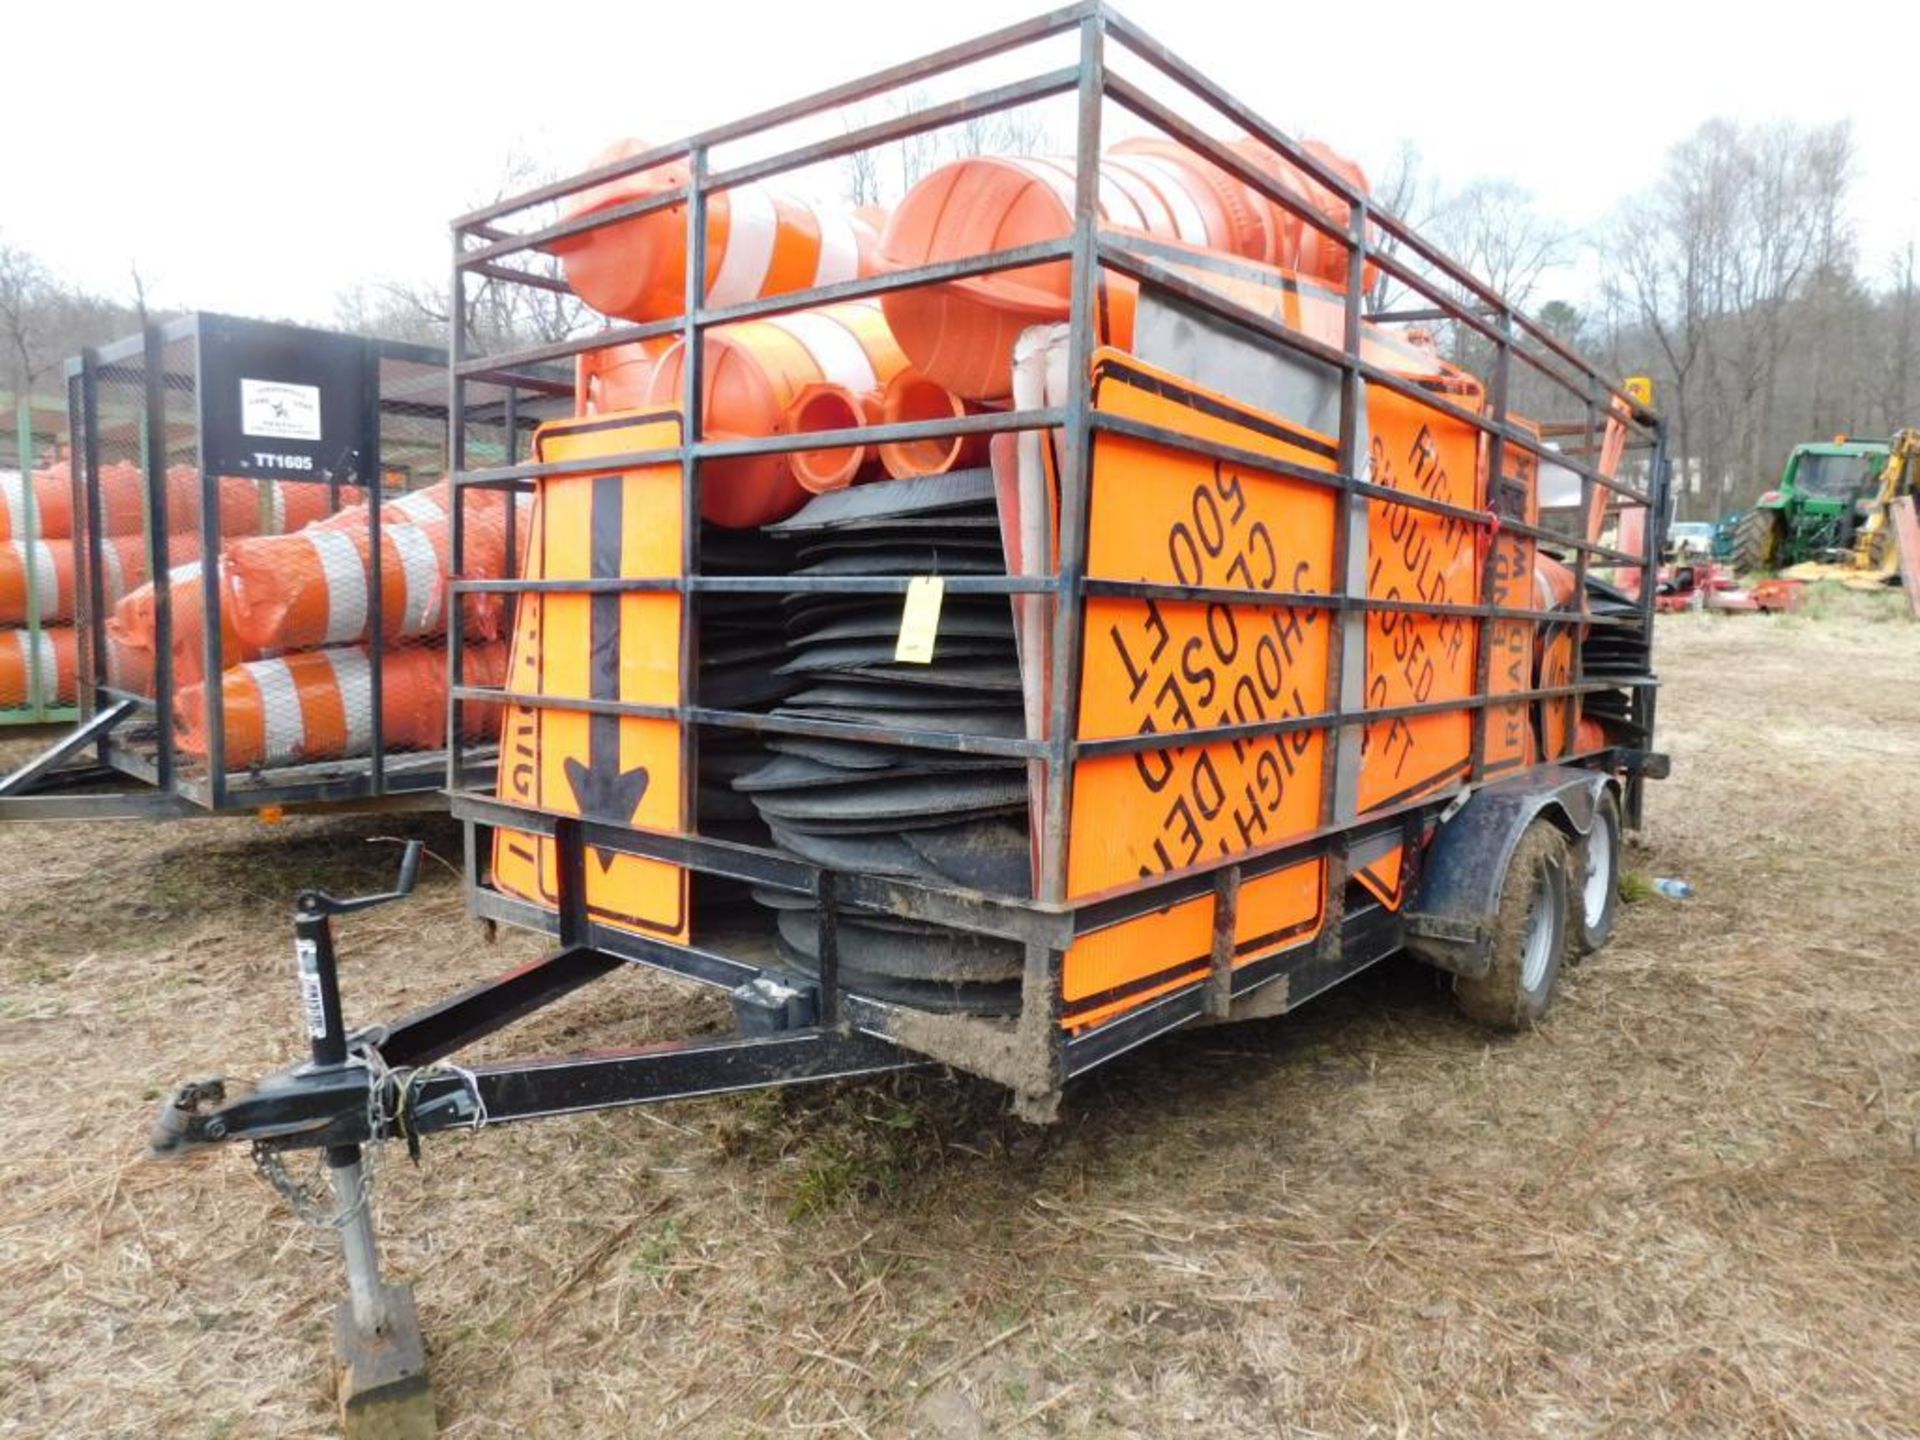 16' Utility Trailer, Dual-Axle w/Contents of Traffic Barricades and Signs, "No VIN"